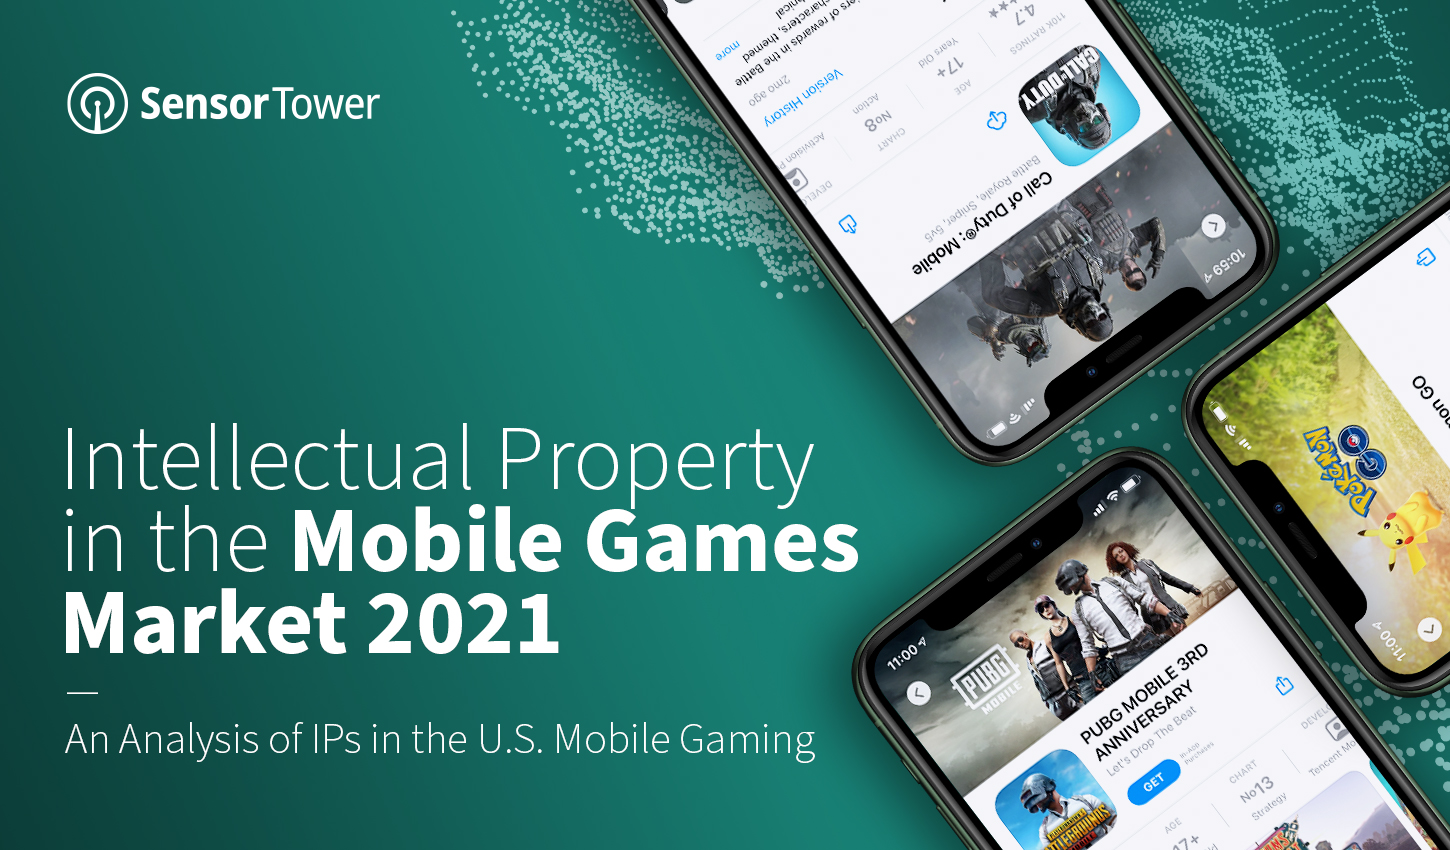 Intellectual Property in the Mobile Games Market 2021 Report main image feature